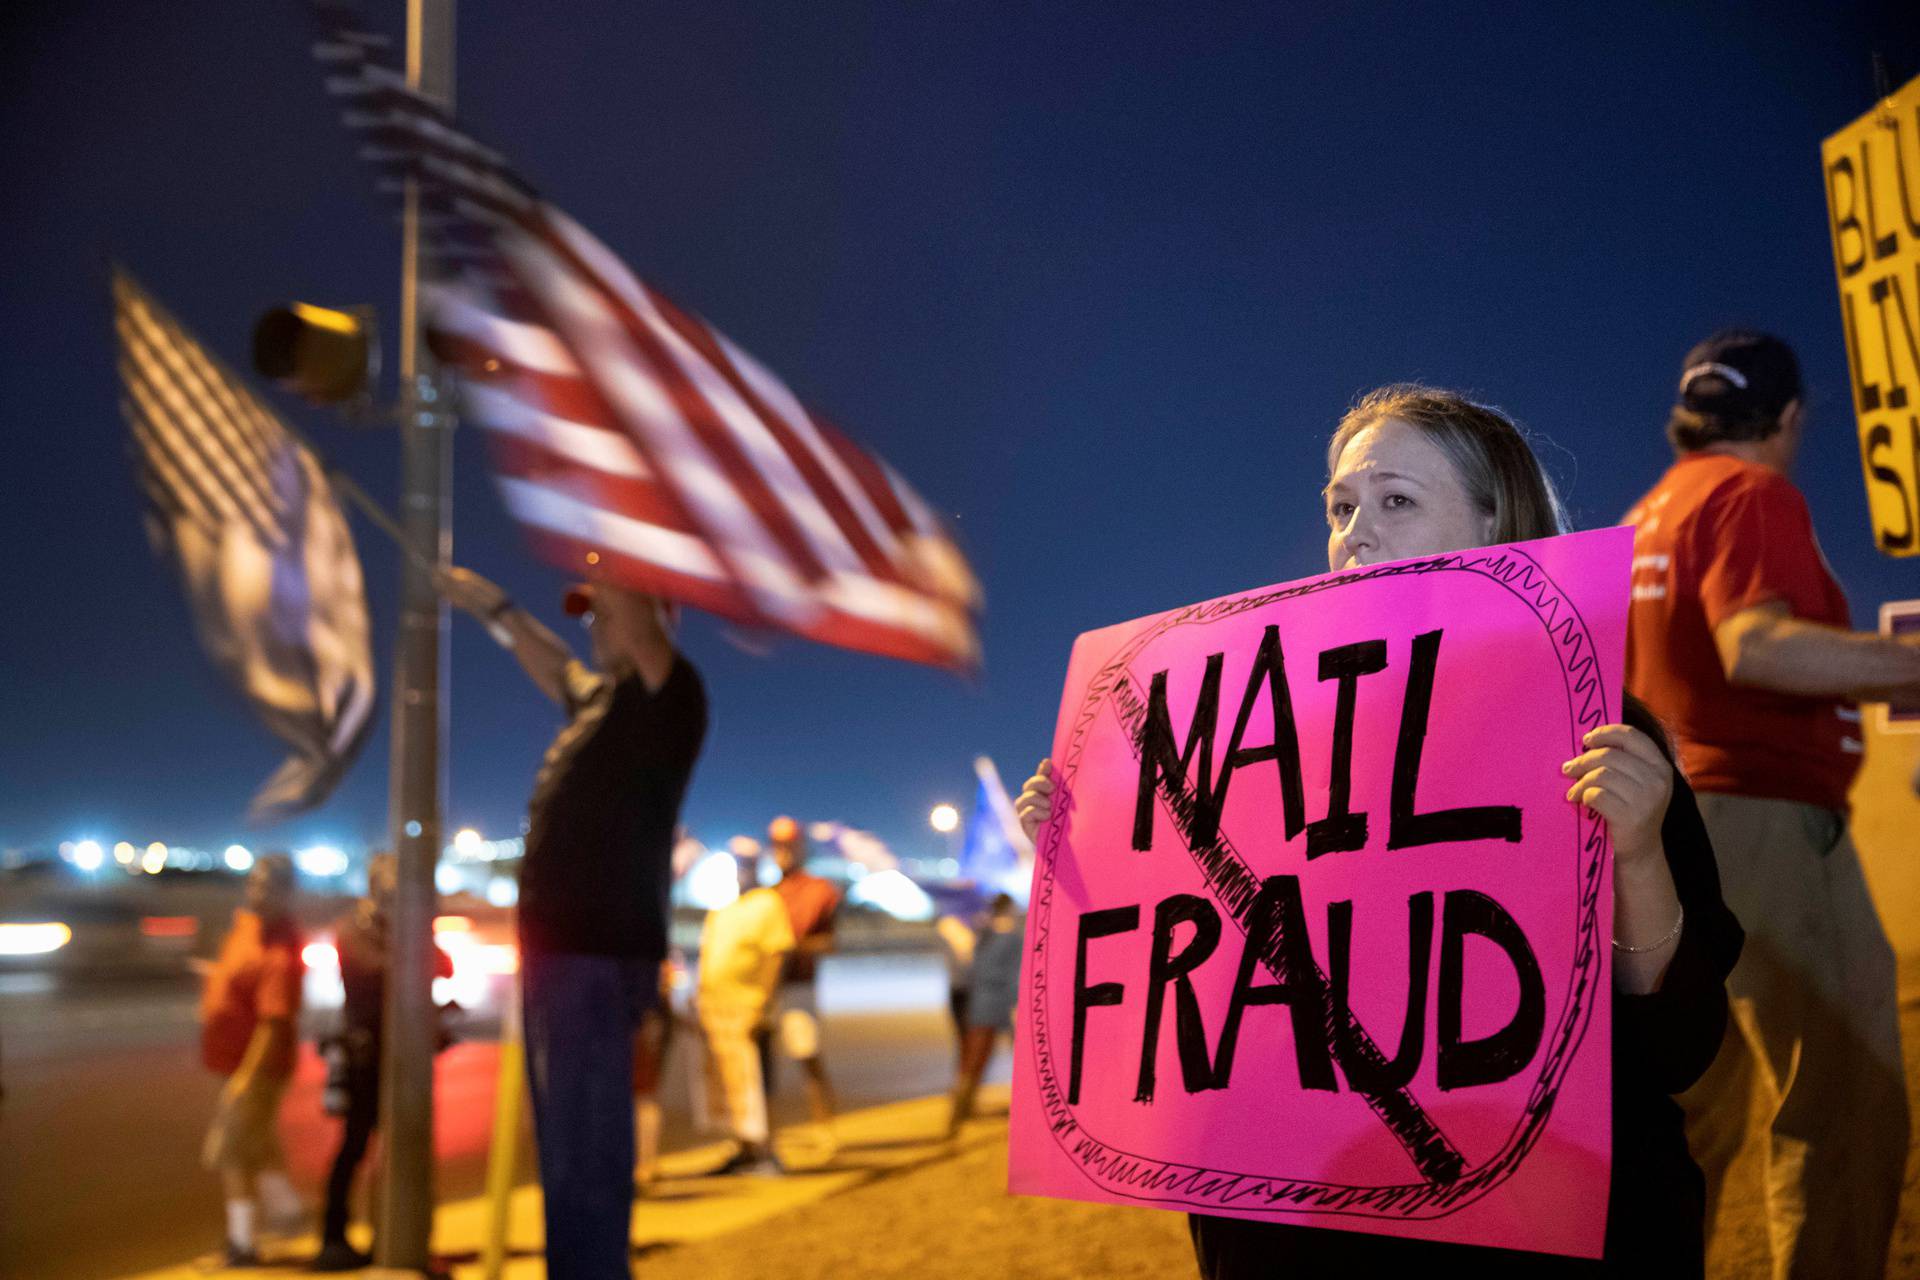 Meg Ross, a supporter of President Donald Trump, holds a sign during a "Stop the Steal" protest at the Clark County Election Center in North Las Vegas